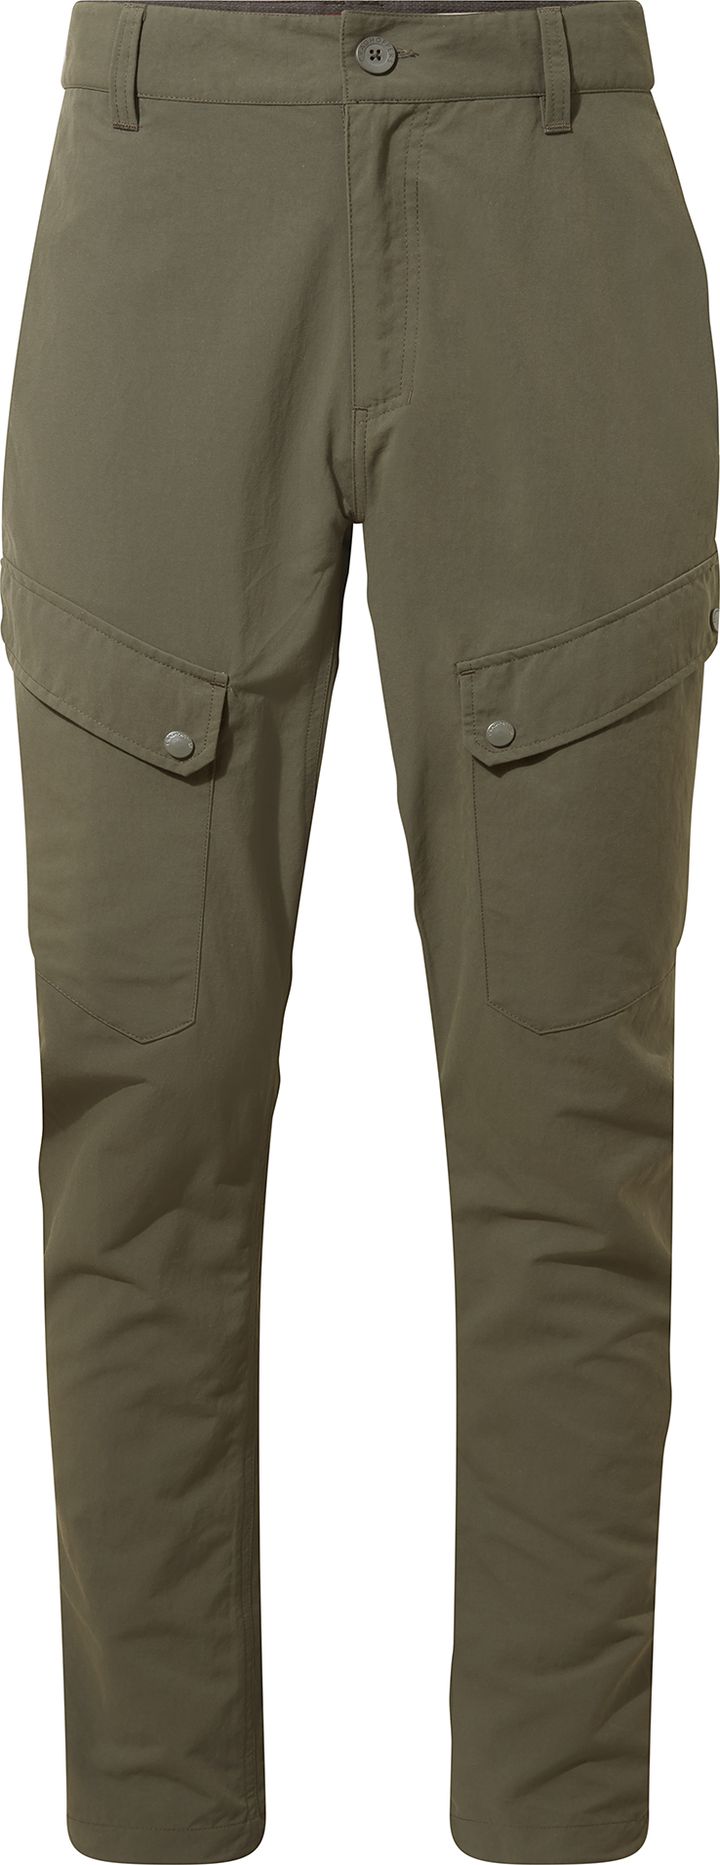 Craghoppers Women's Nosilife Adventure Trouser Woodland Green Craghoppers